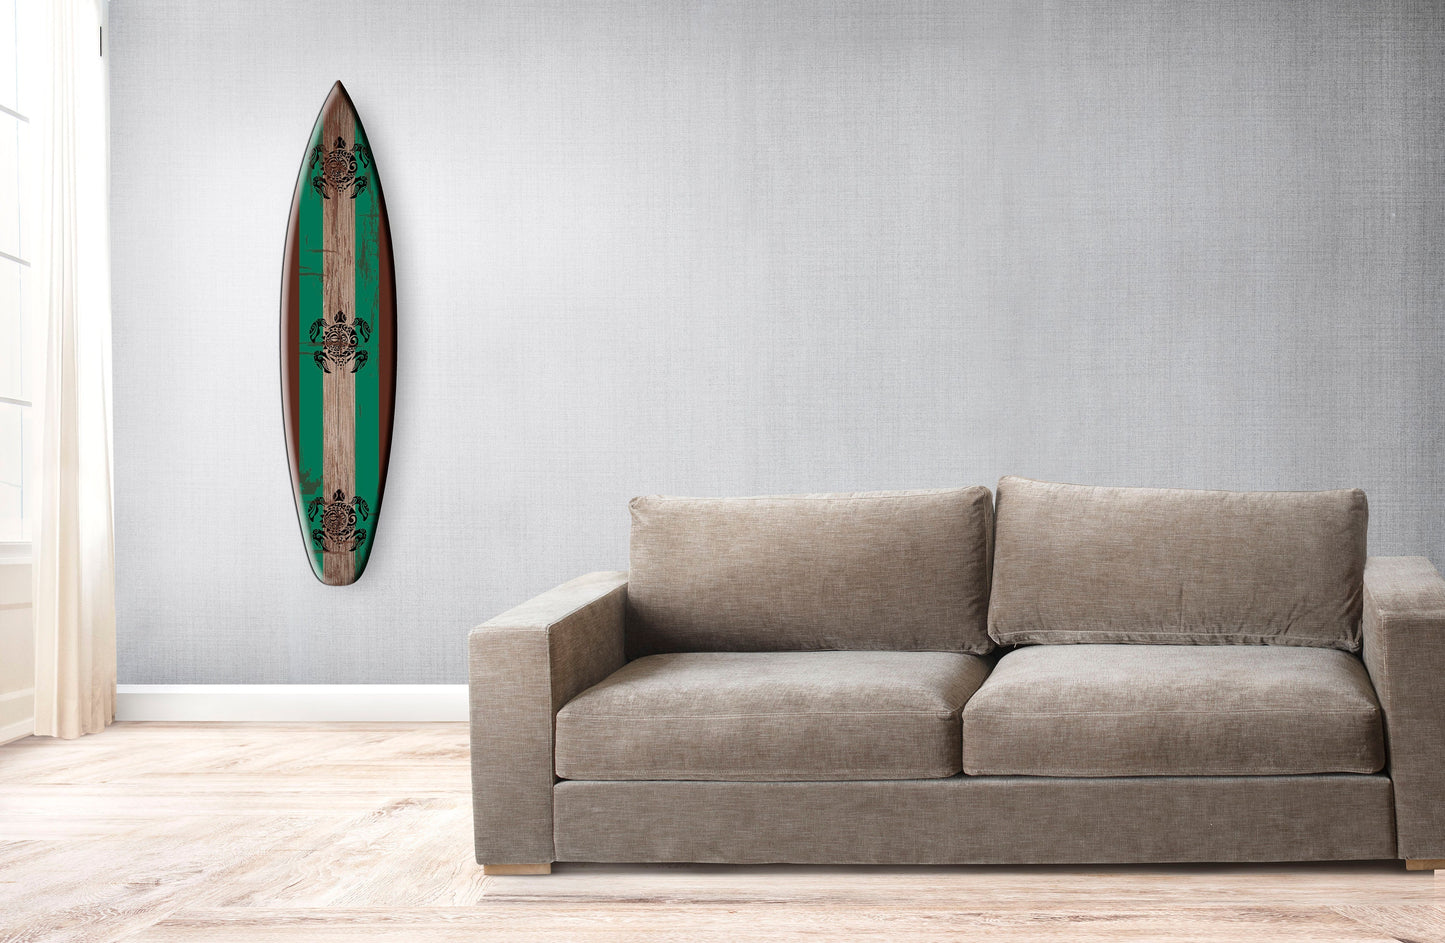 Interior Surfboard for Wall with Turtles Print: Driftwood Effect Wall Sign in Turquoise Decor